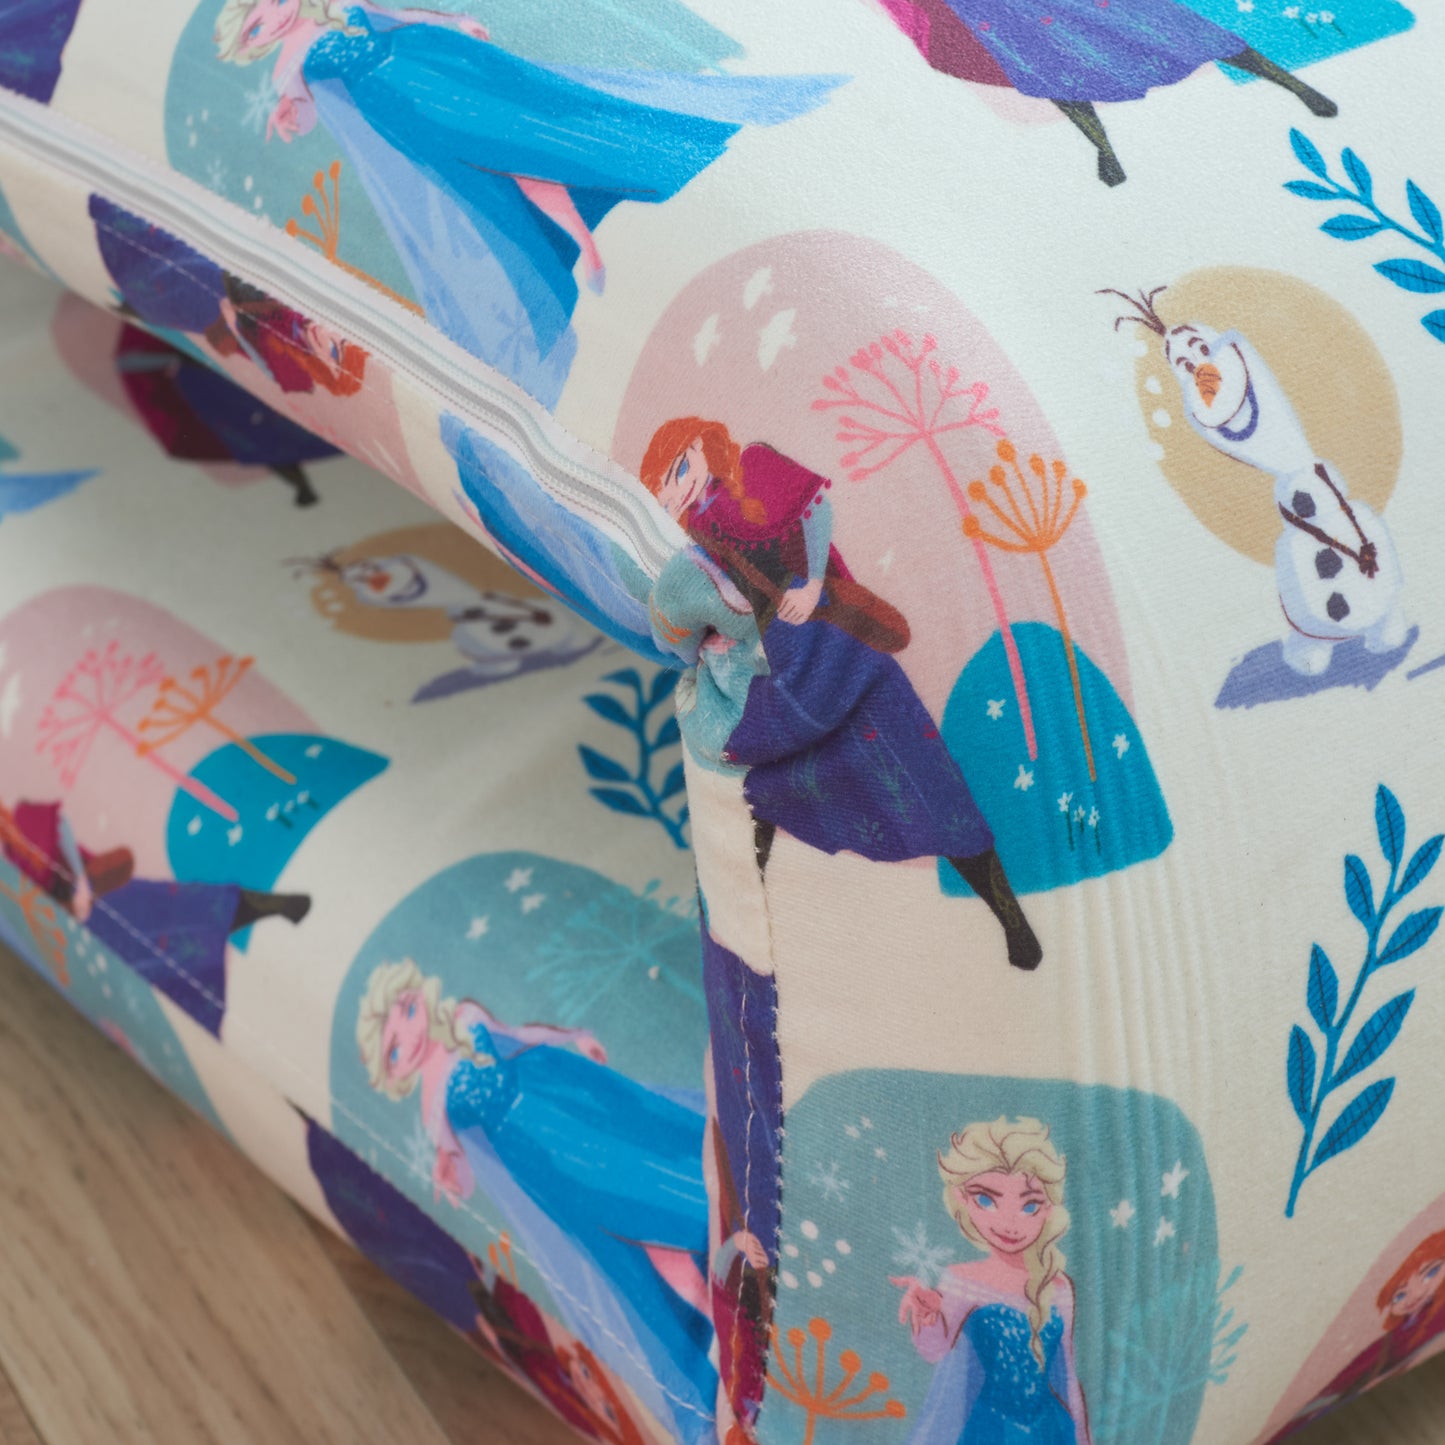 Disney Frozen Fold Out Bed Chair